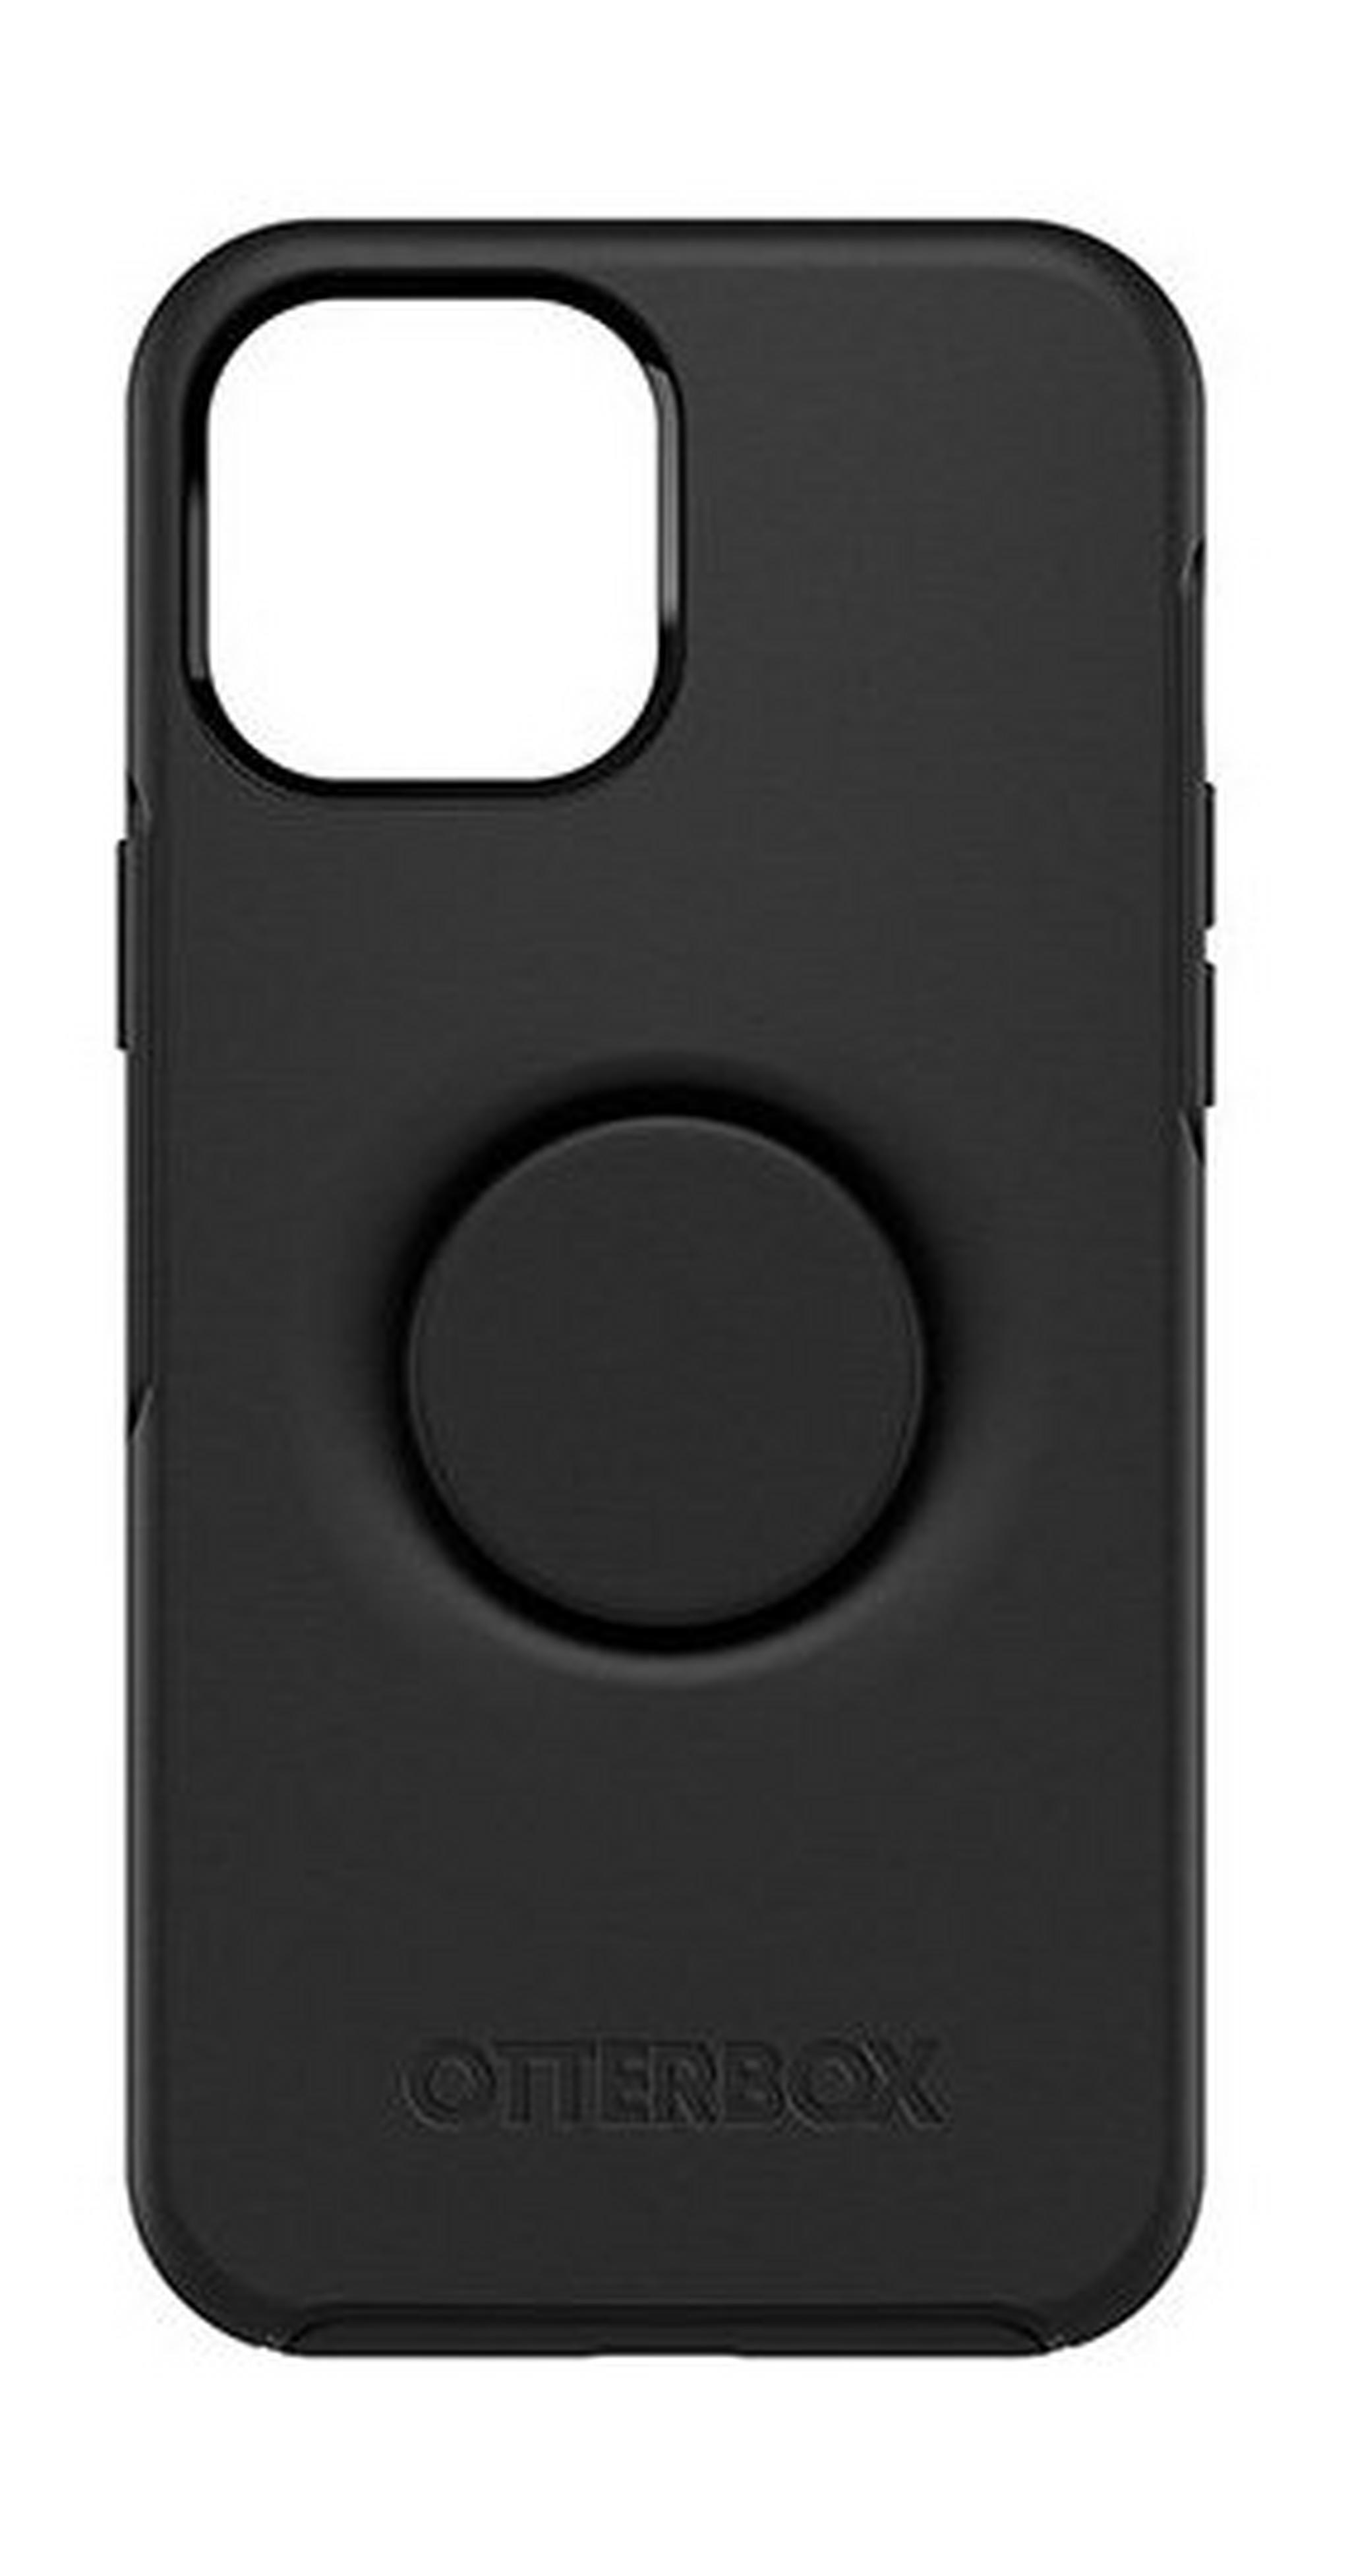 Otterbox iPhone 12 Pro Otter Case with Pop Symmetry Grip - Black